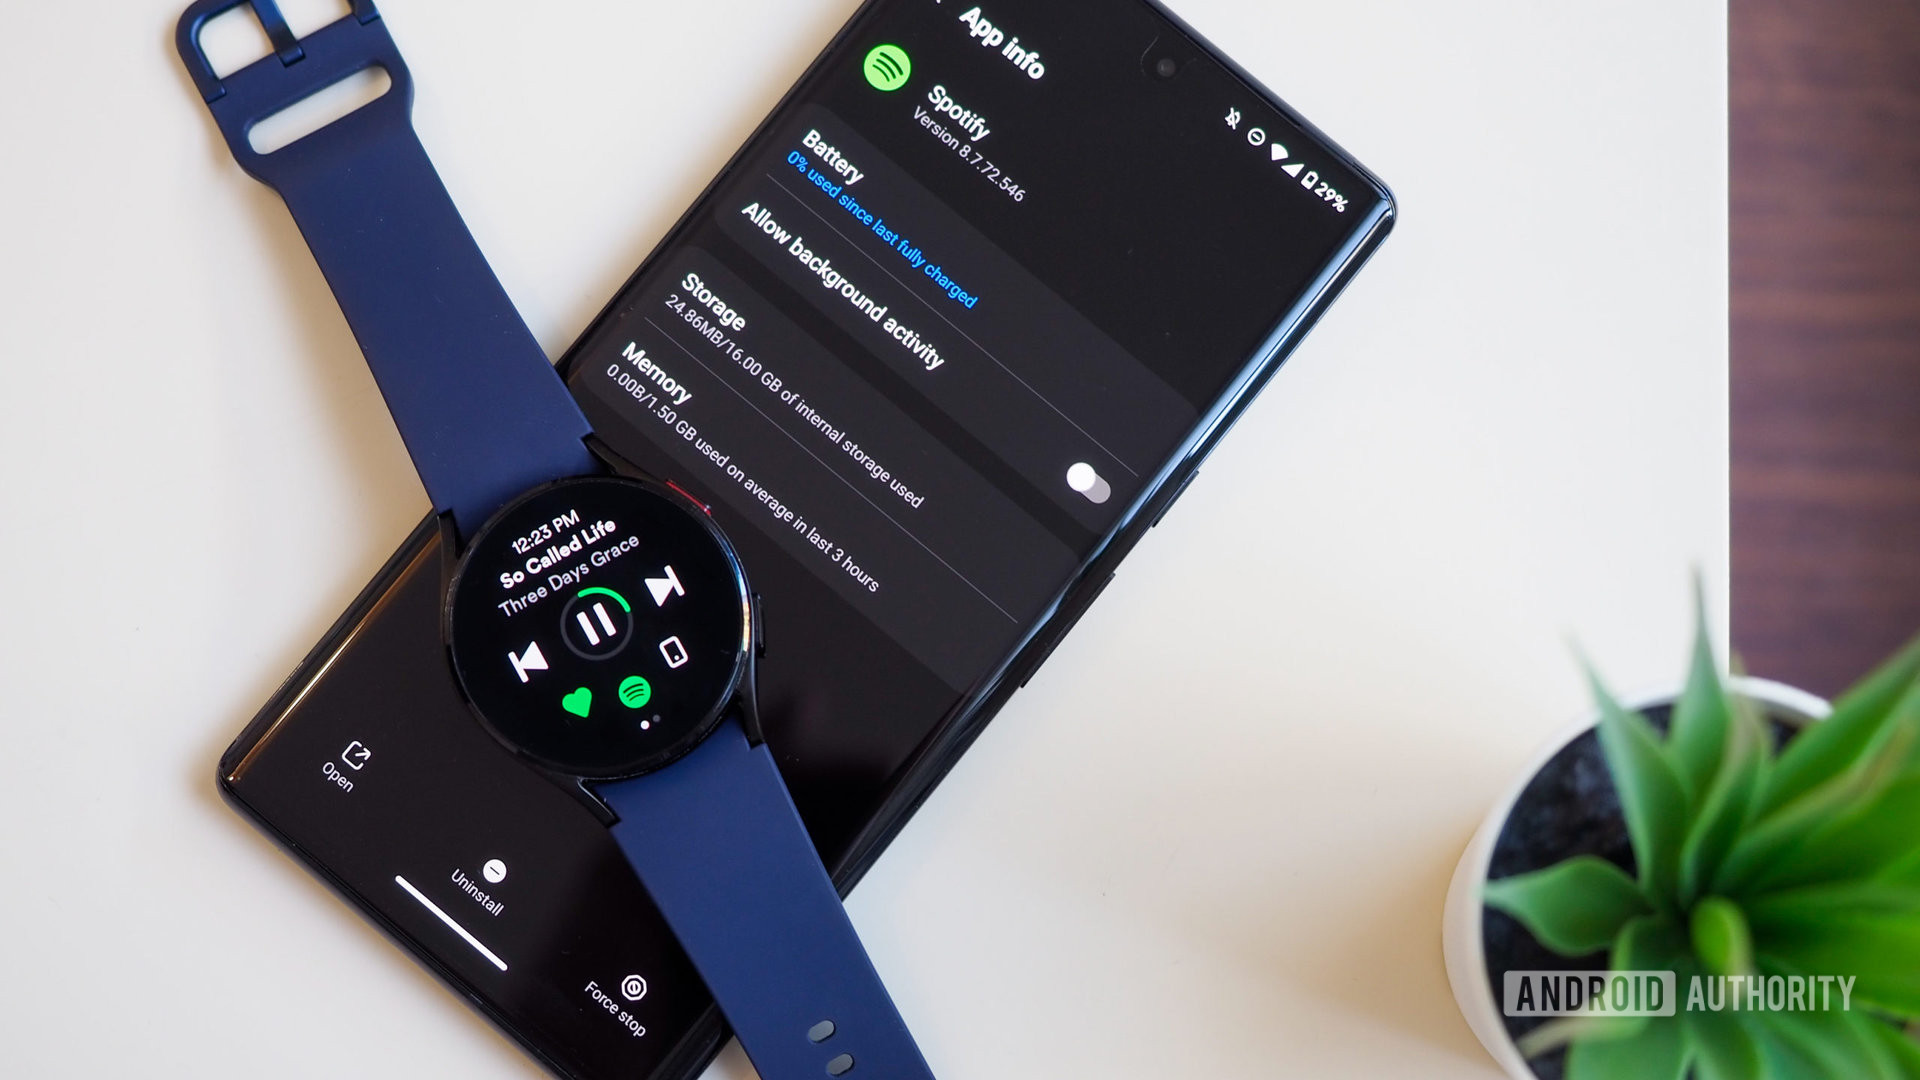 Galaxy Watch 4 and the Galaxy Wearable app on a Pixel 6 Pro showing Spotify app information and management